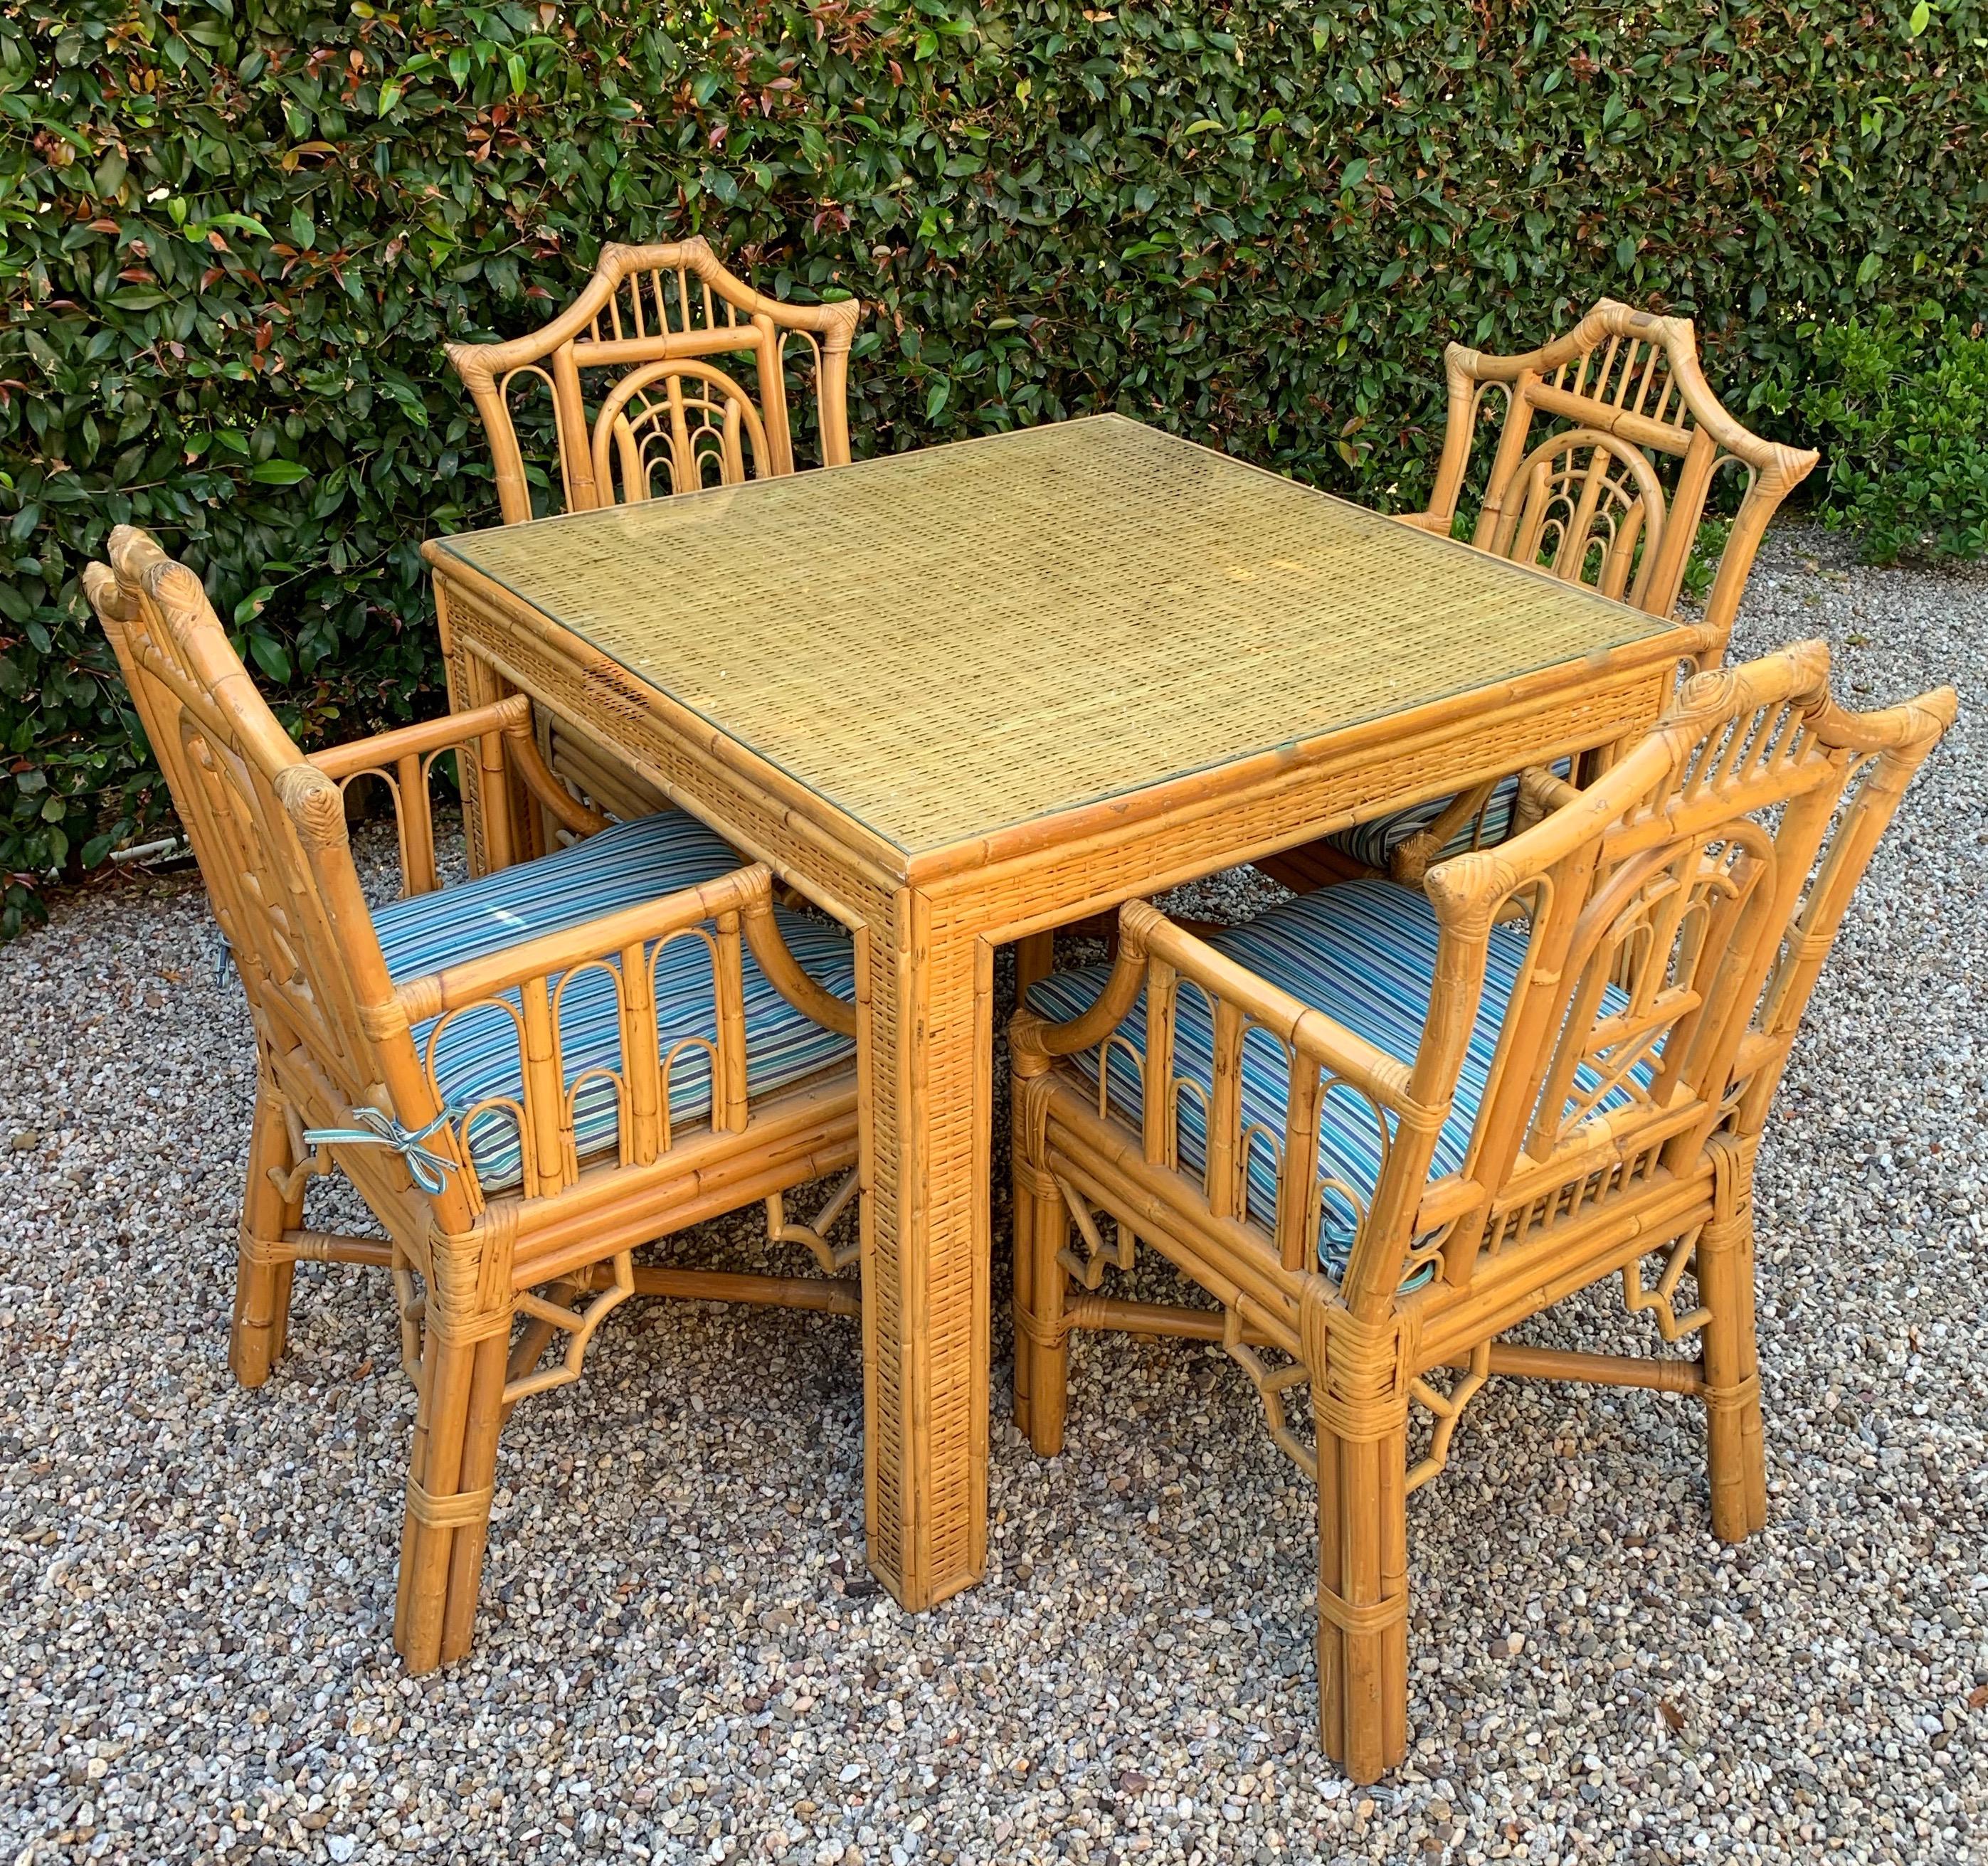 5-piece Chinese Chippendale style bamboo game table or dining table and armchairs with regency influences, an exceptional set of uniquely designed chinoiserie Chippendale chairs in Pagoda style, all with arm and Sunbrella Brand striped cushions,